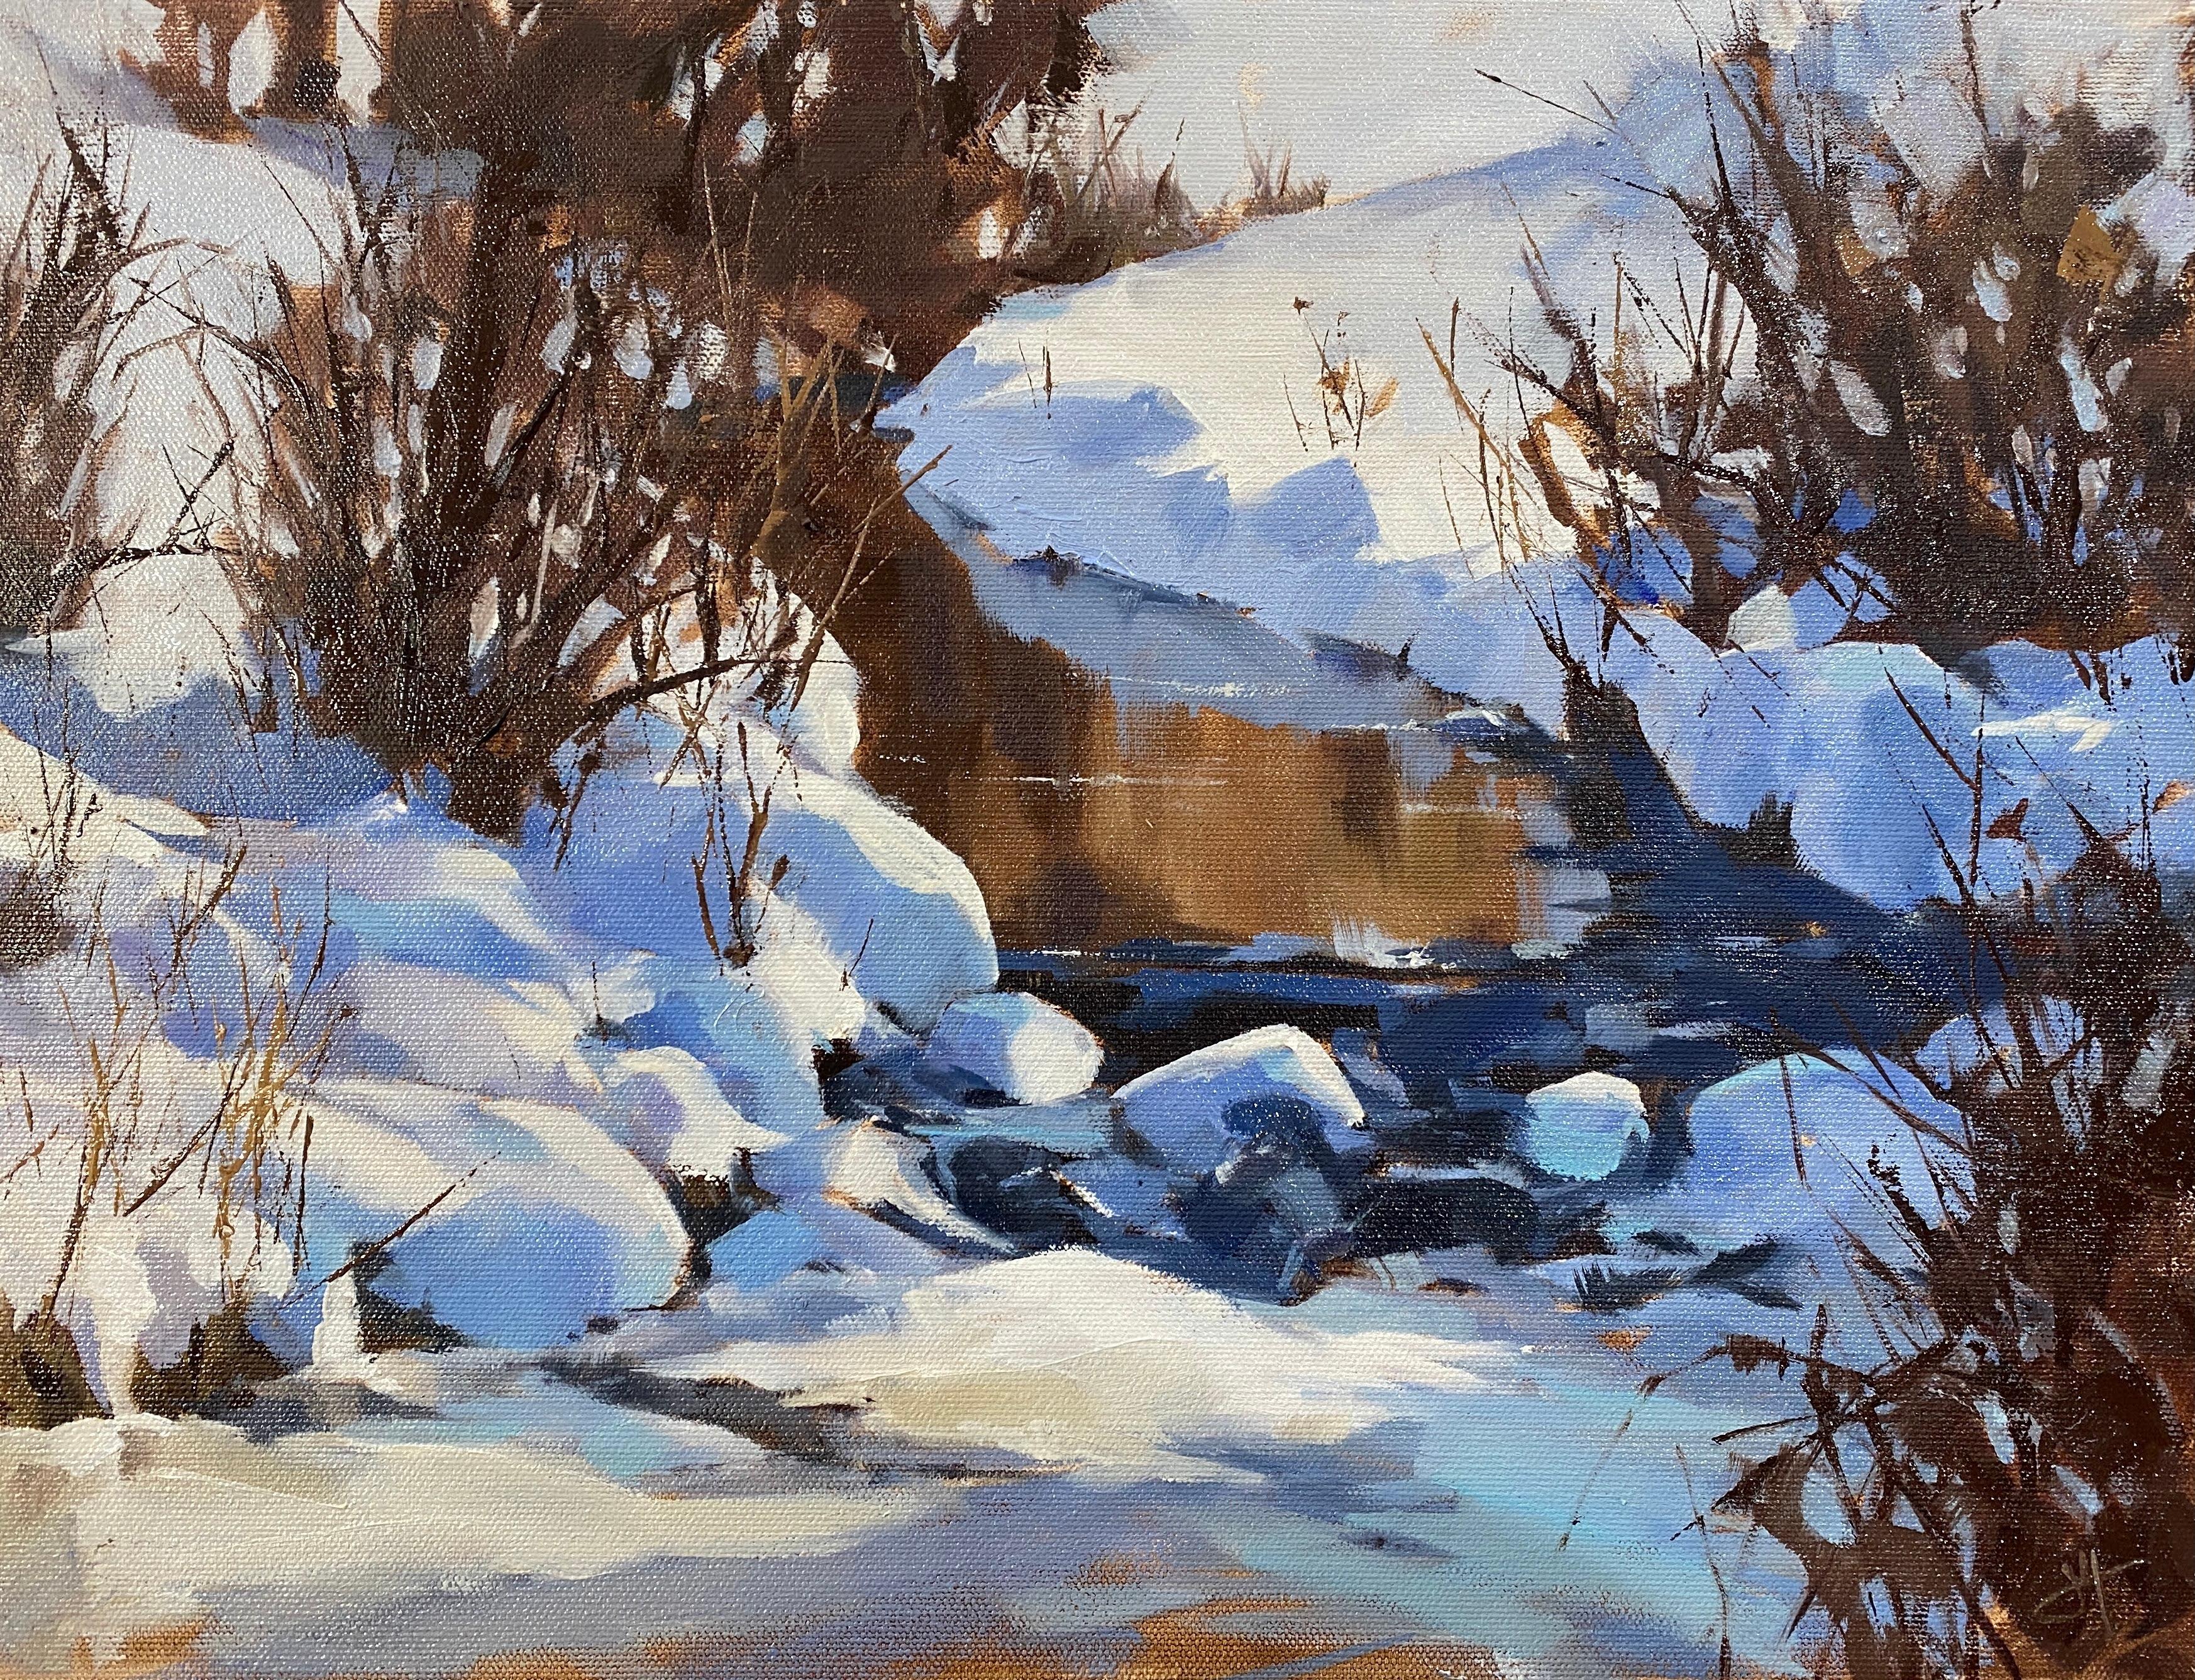 Judd Mercer Figurative Painting - "Cold Stream, " Oil painting